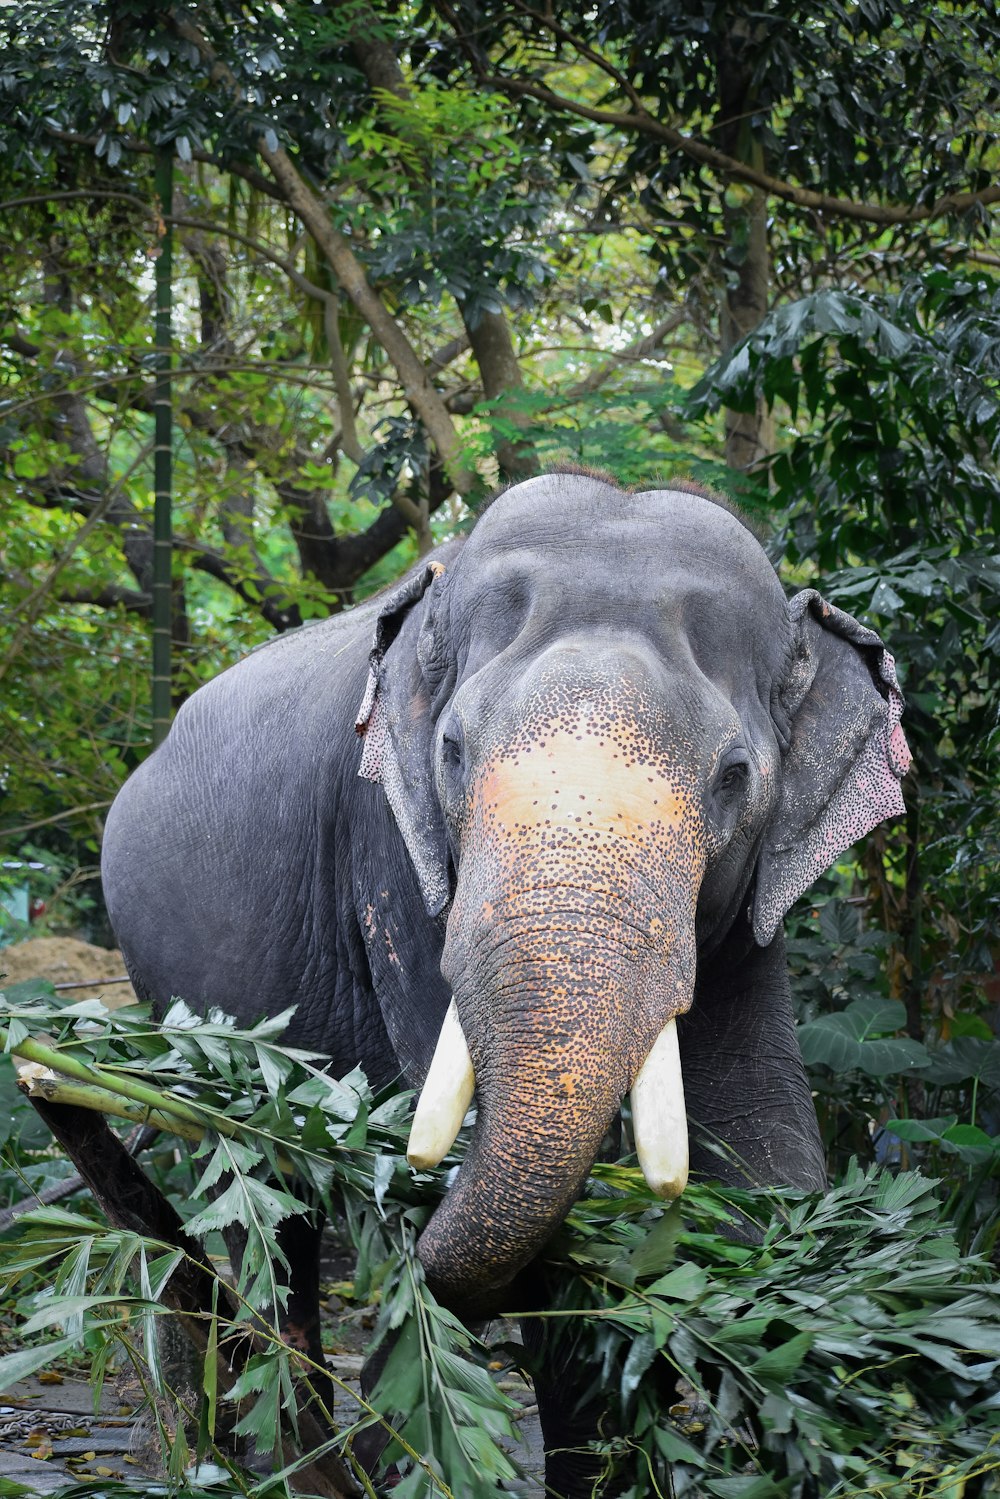 an elephant with tusks eating leaves in a forest